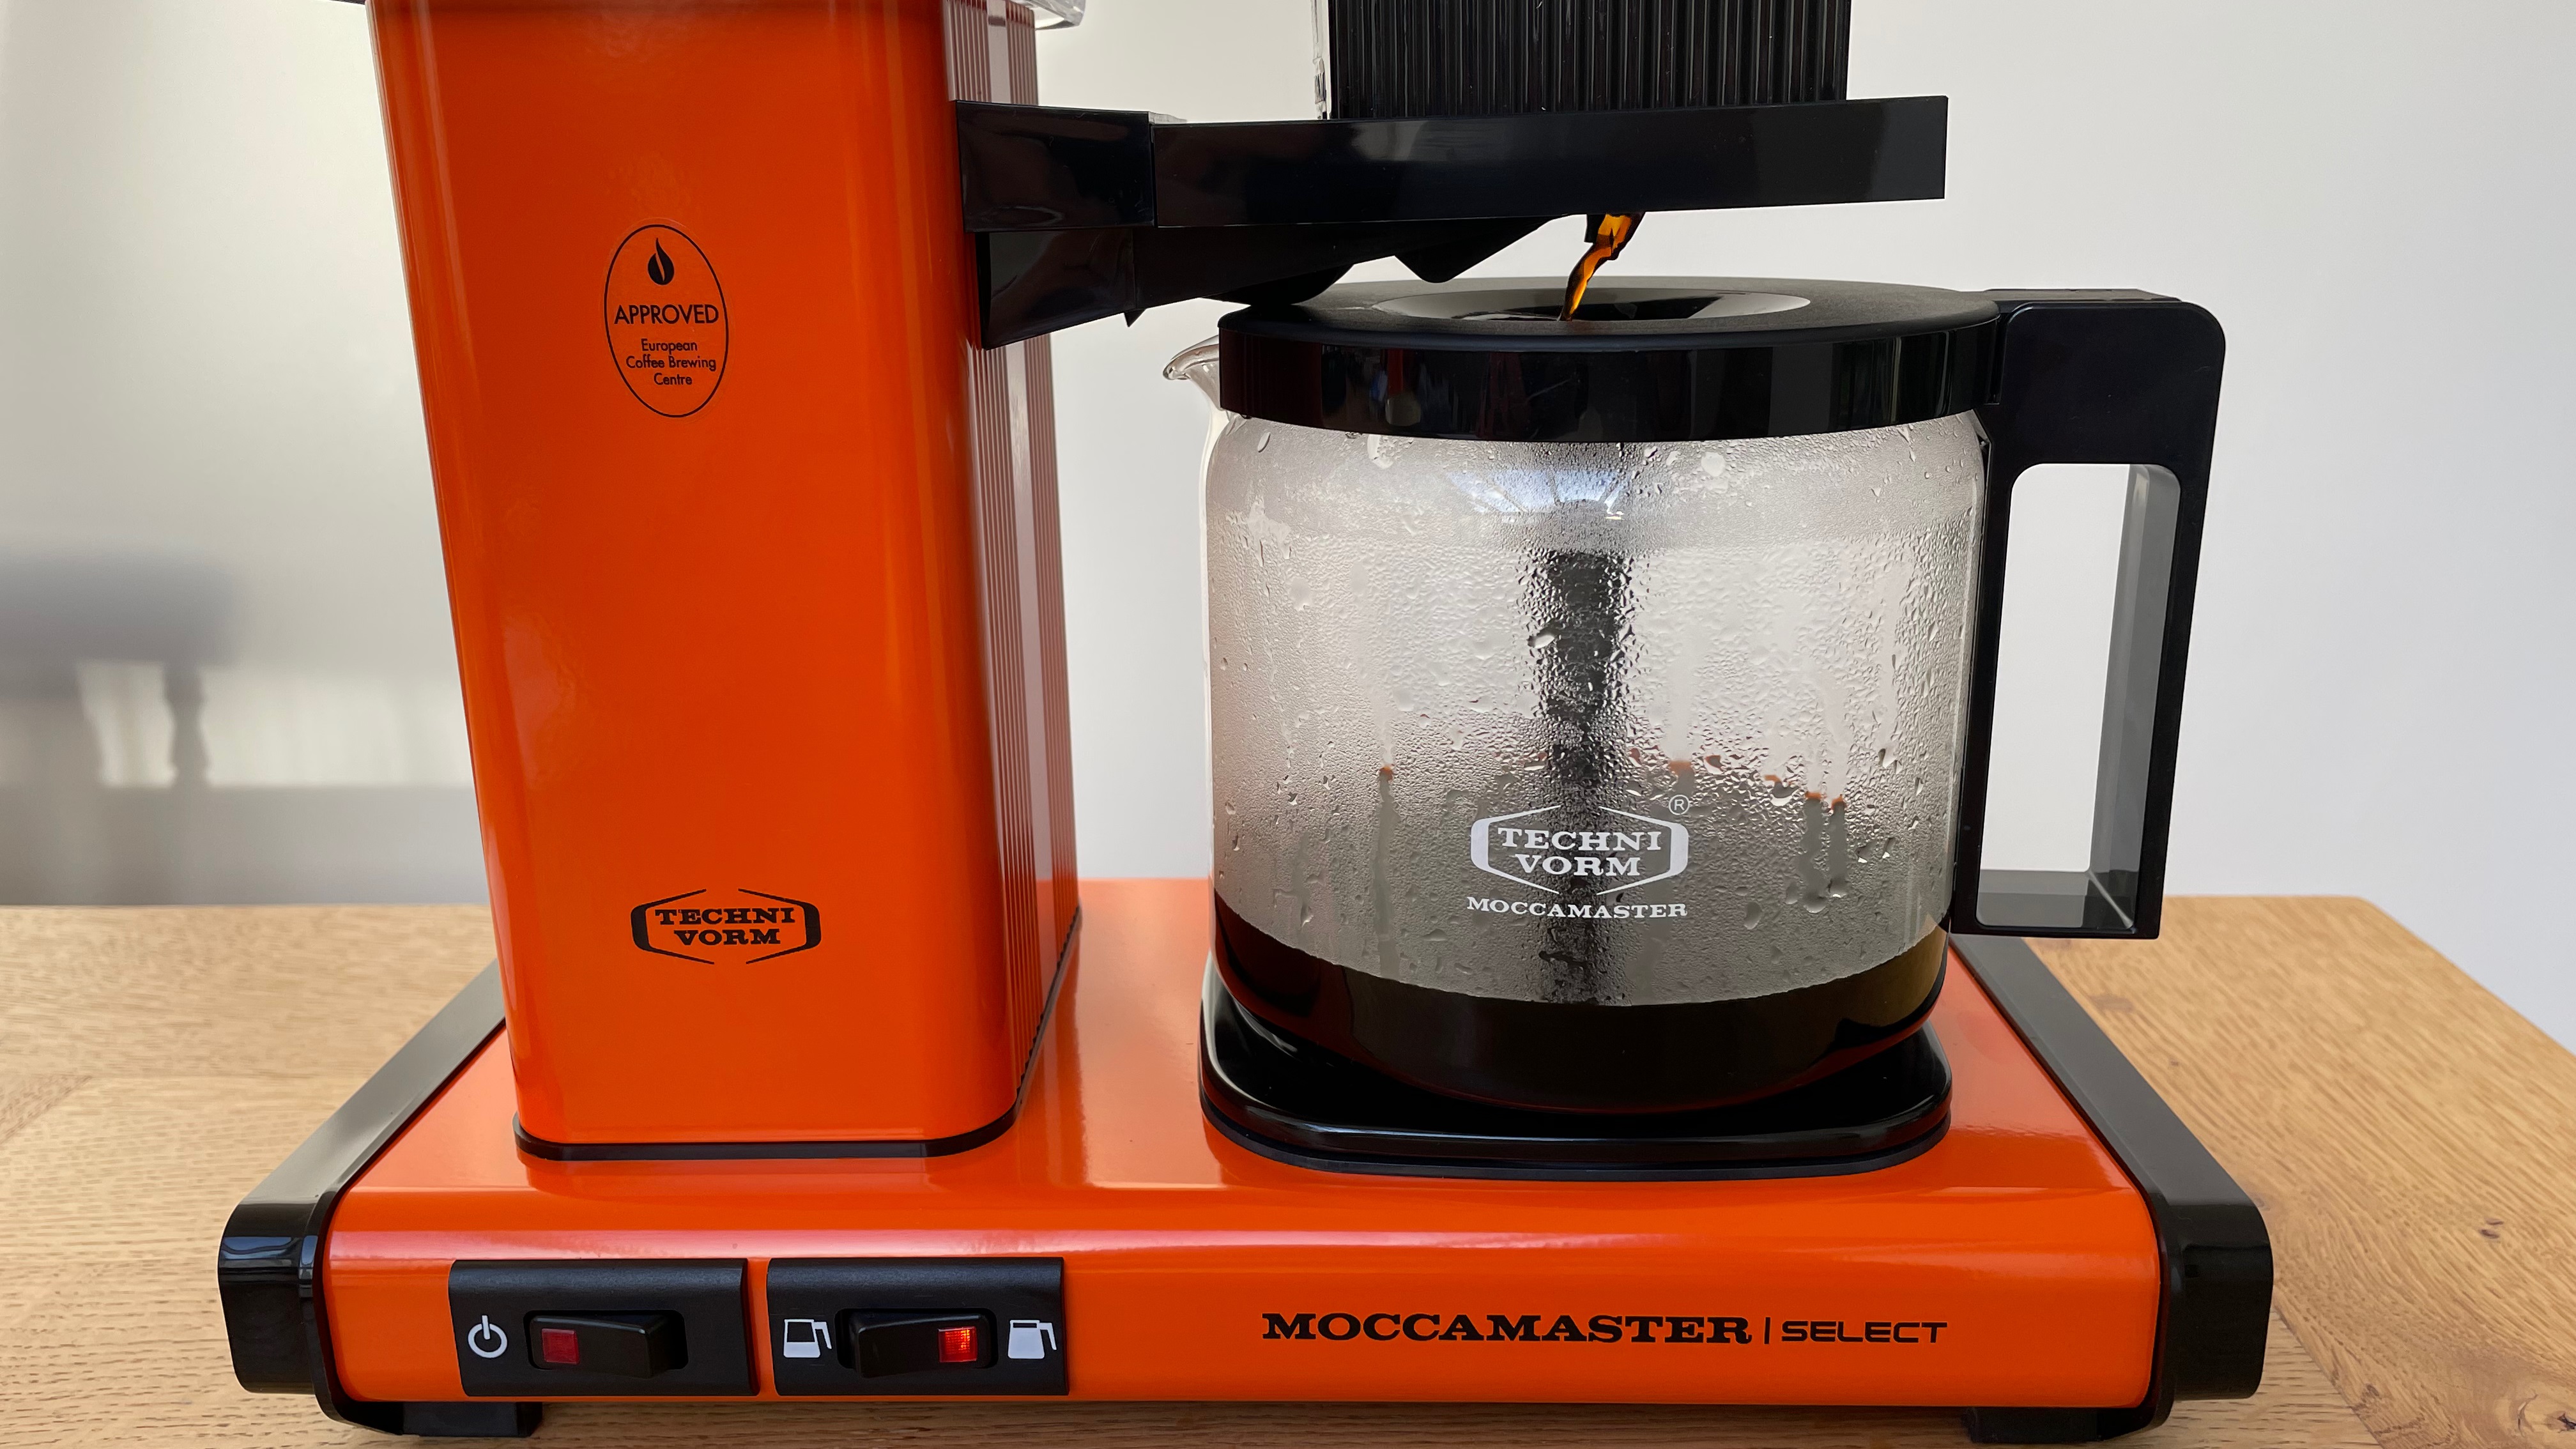 Brewing process on the Moccamaster